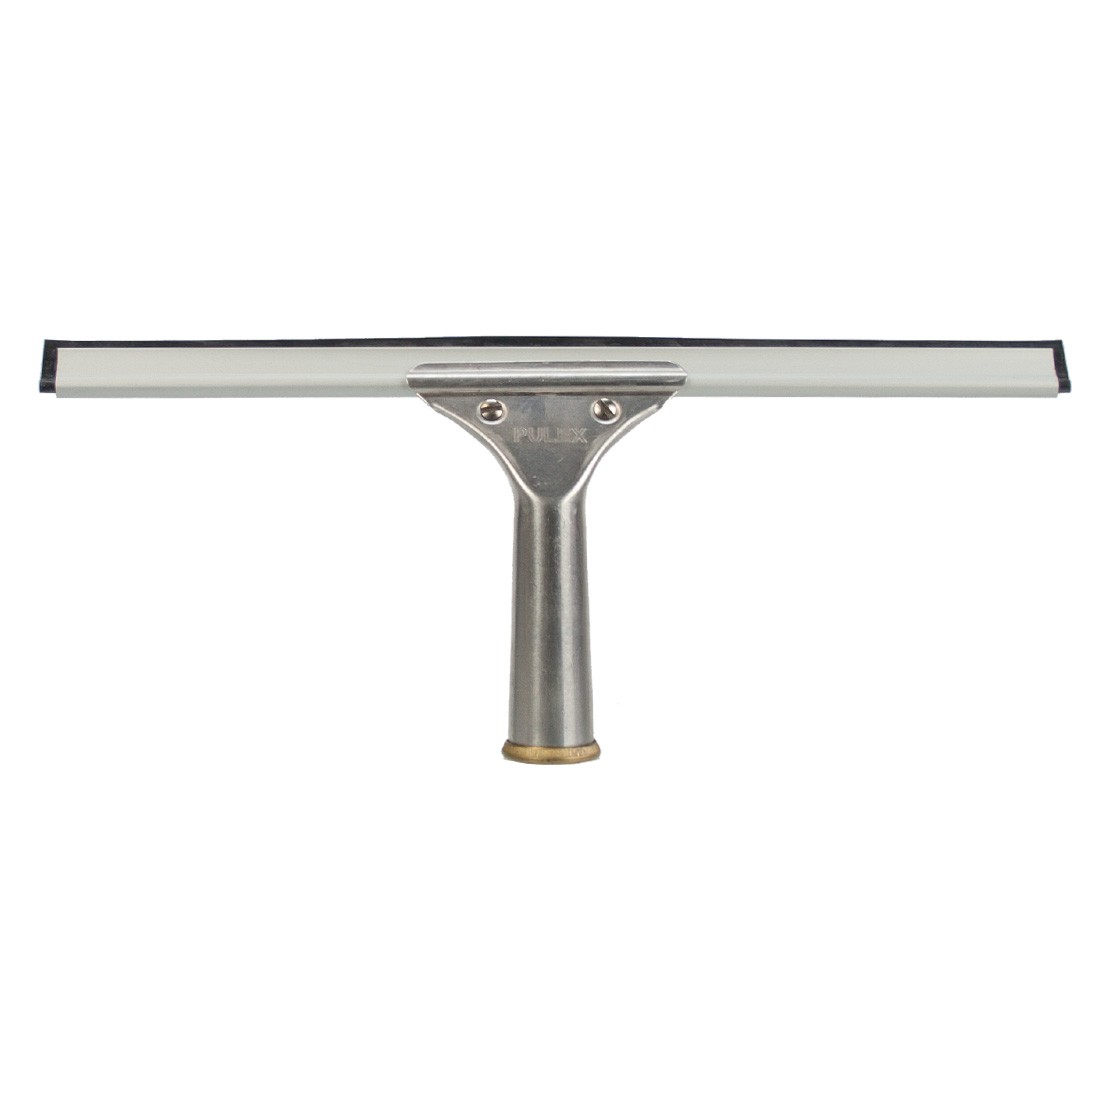 Pulex Complete UltraLite Aluminum Squeegee Front View